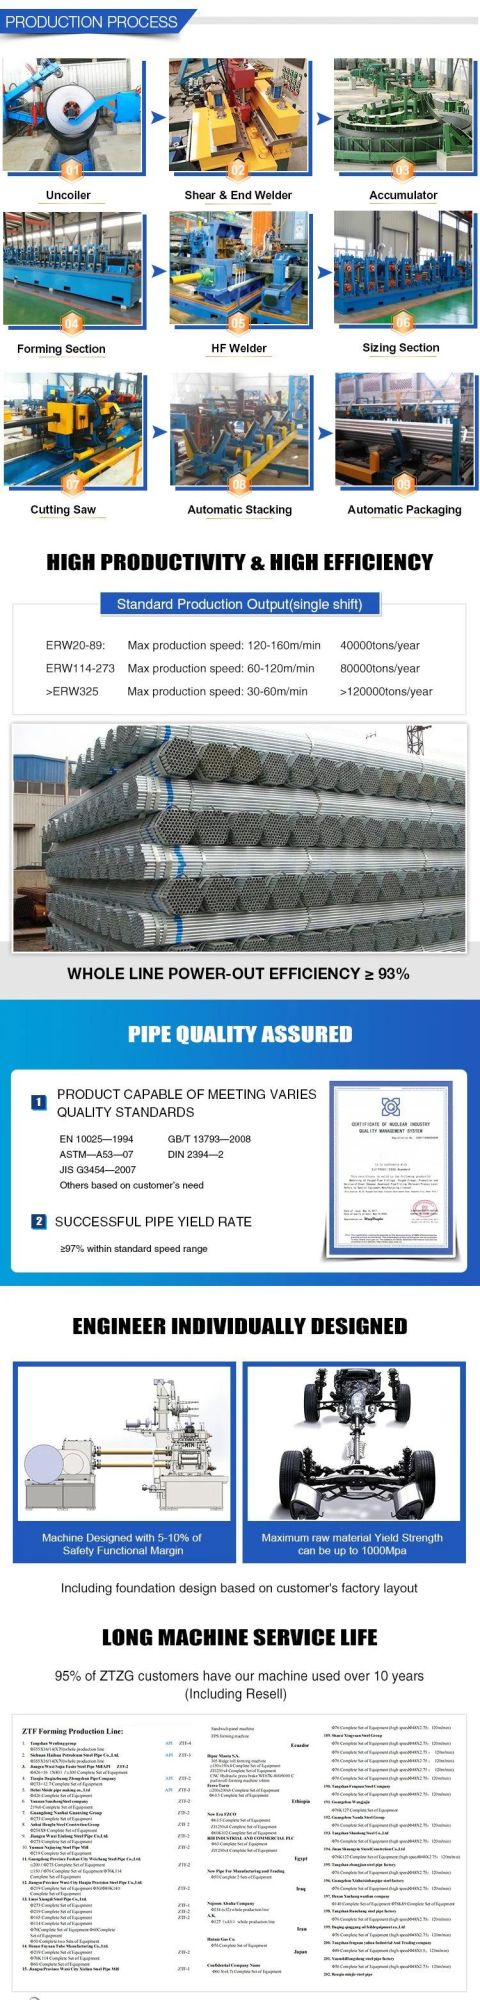 Thickness 0.4-2.5mm 38-114mm Stainless Steel Tube Mill Various Shapes